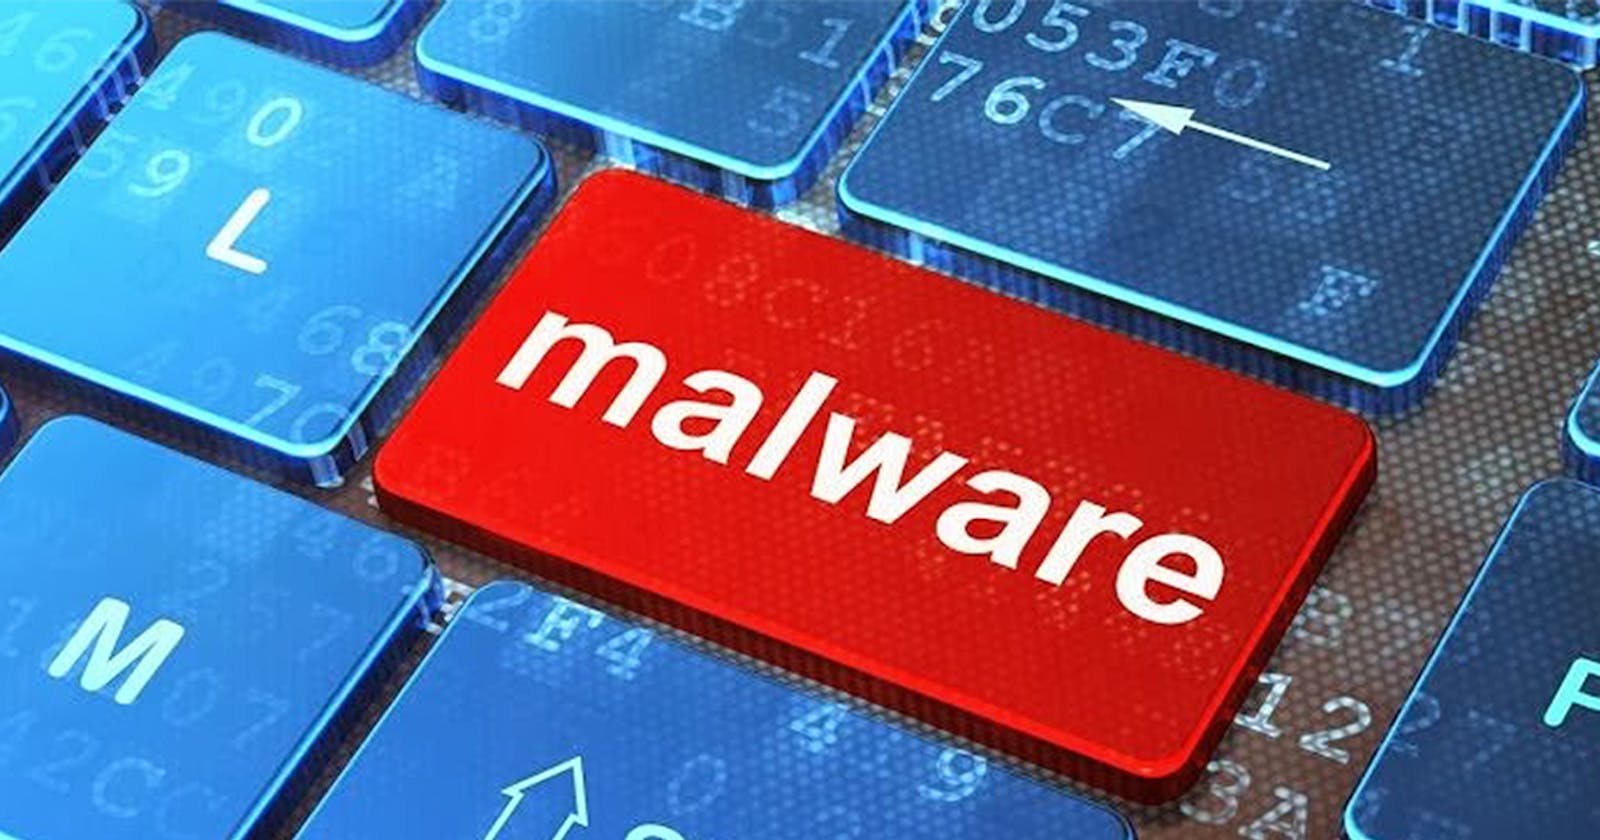 What Is A Malware?